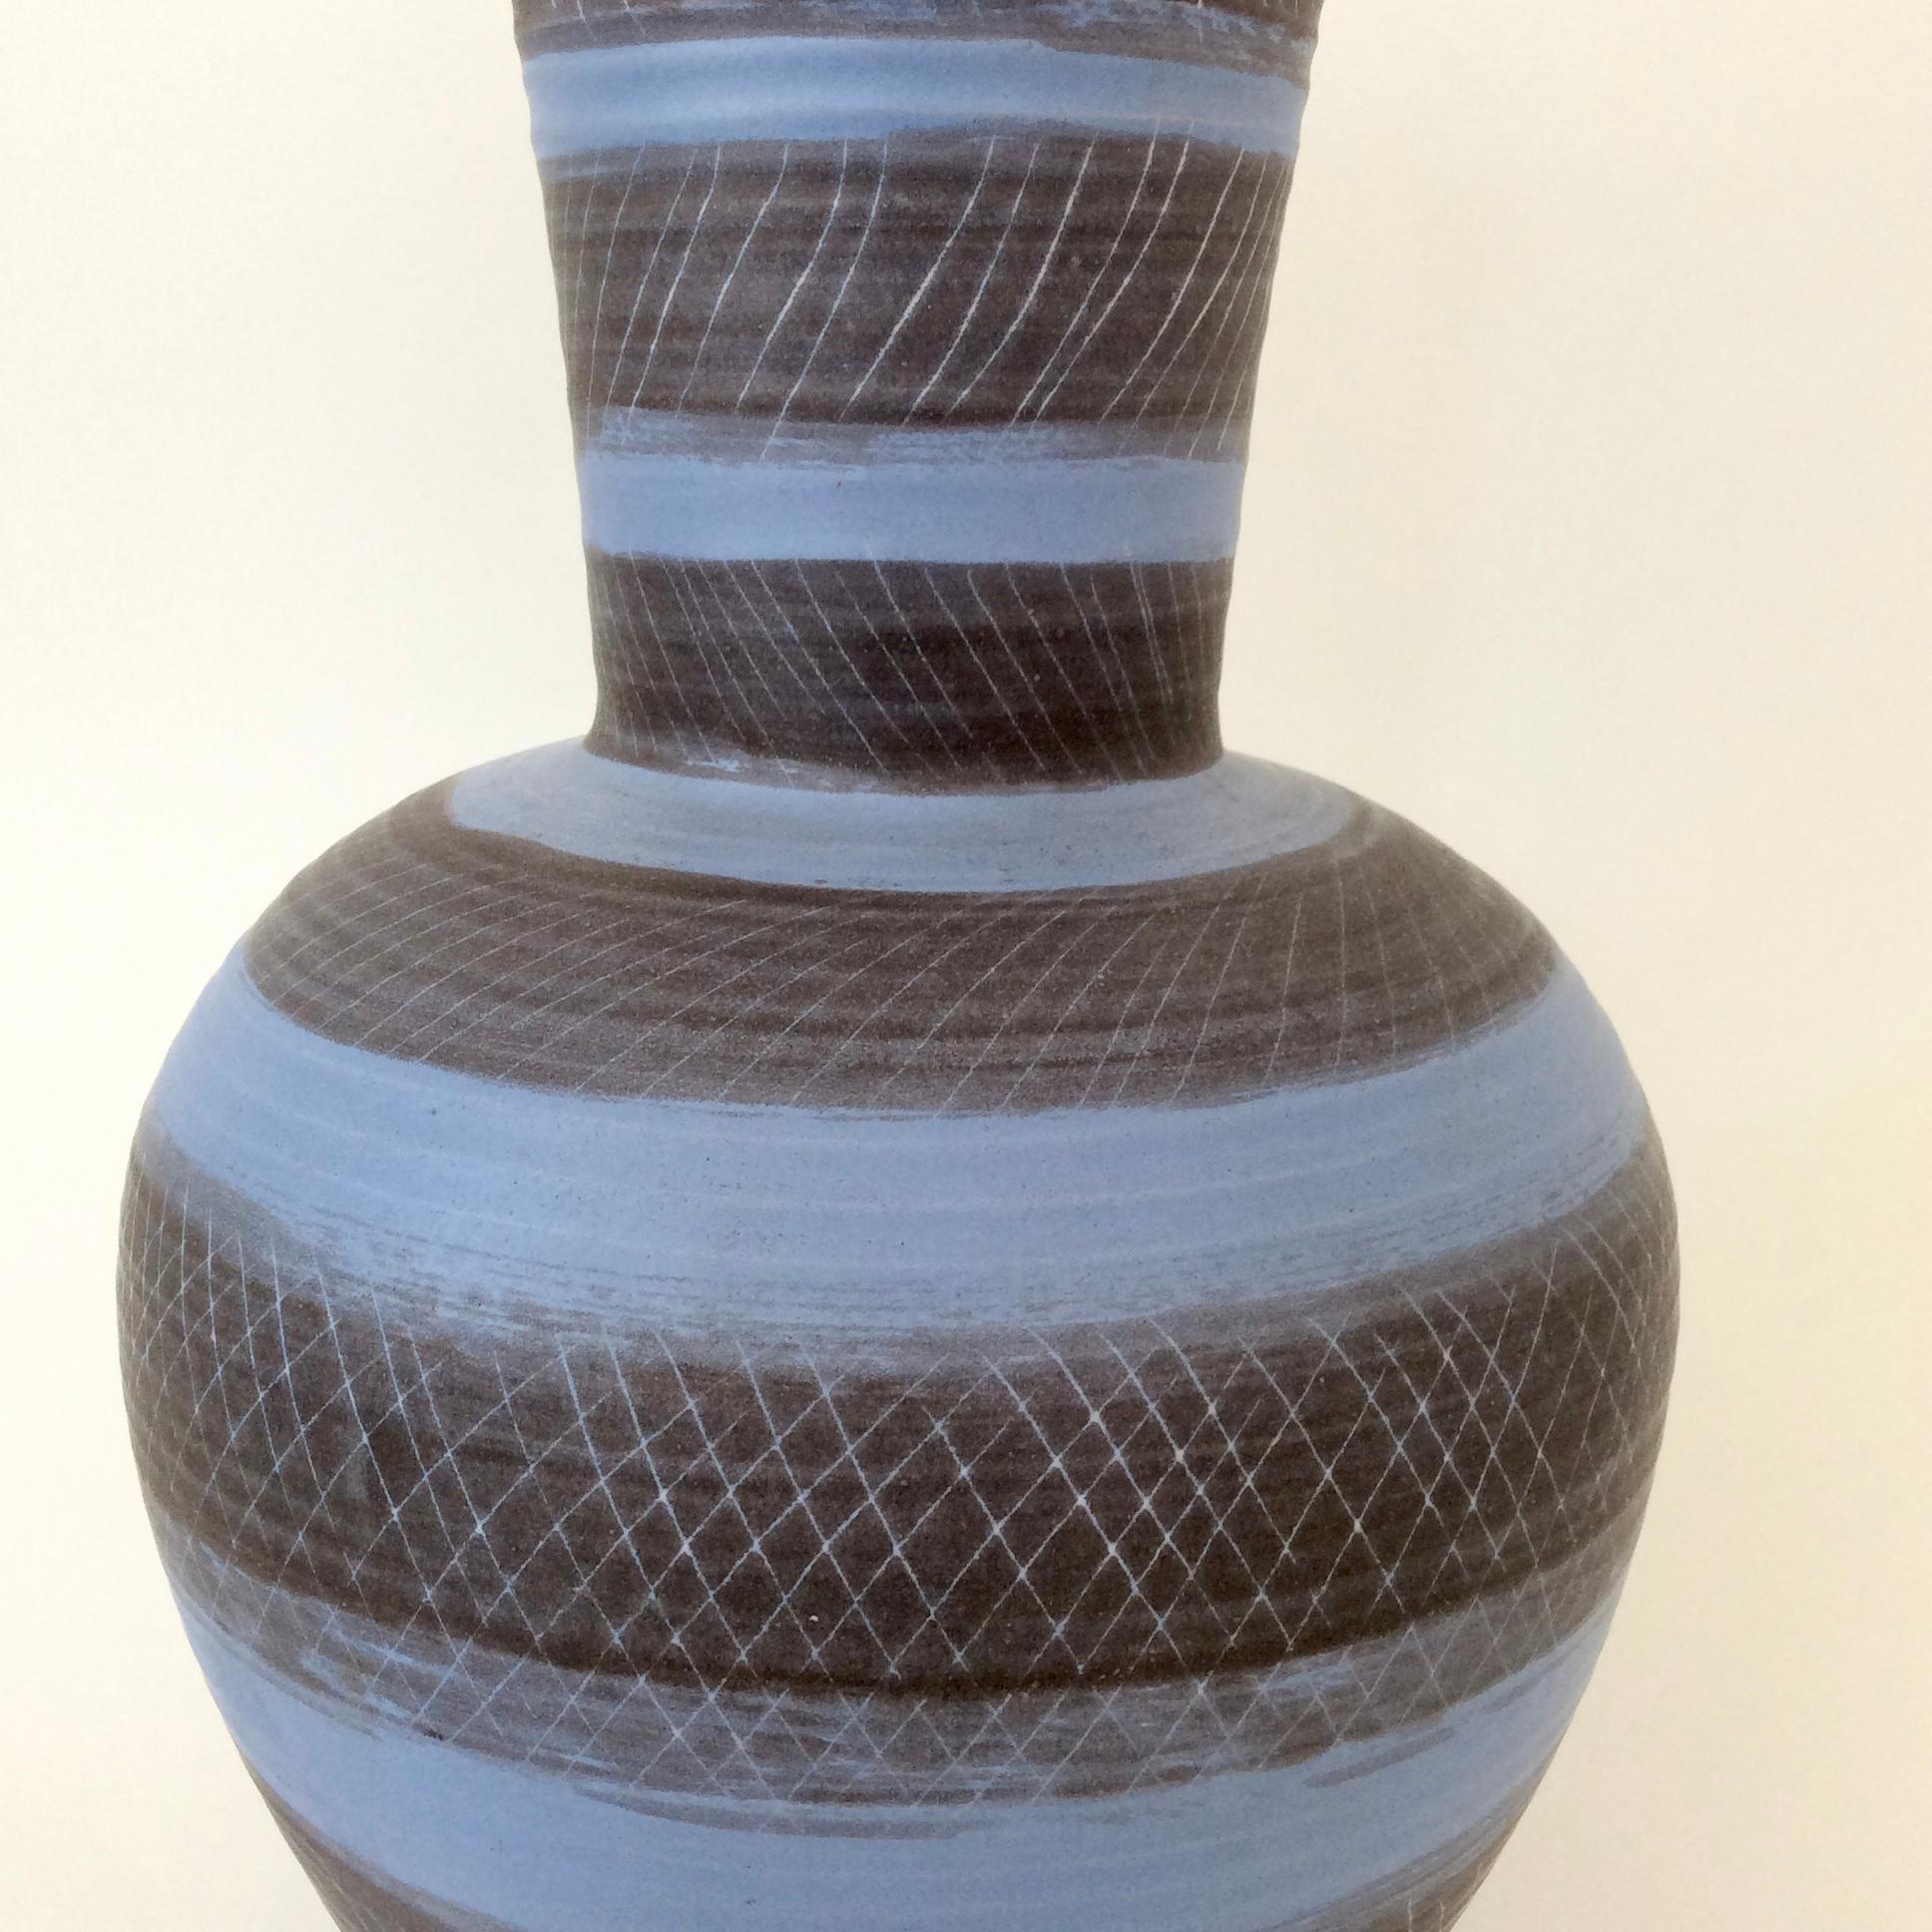 Rare Marcel Guillot vase, circa 1950, France.
Luminous blue and black ceramic.
Signed underneath.
Dimensions: 36 cm height, diameter 23 cm.
Good condition.
 All purchases are covered by our Buyer Protection Guarantee.
This item can be returned